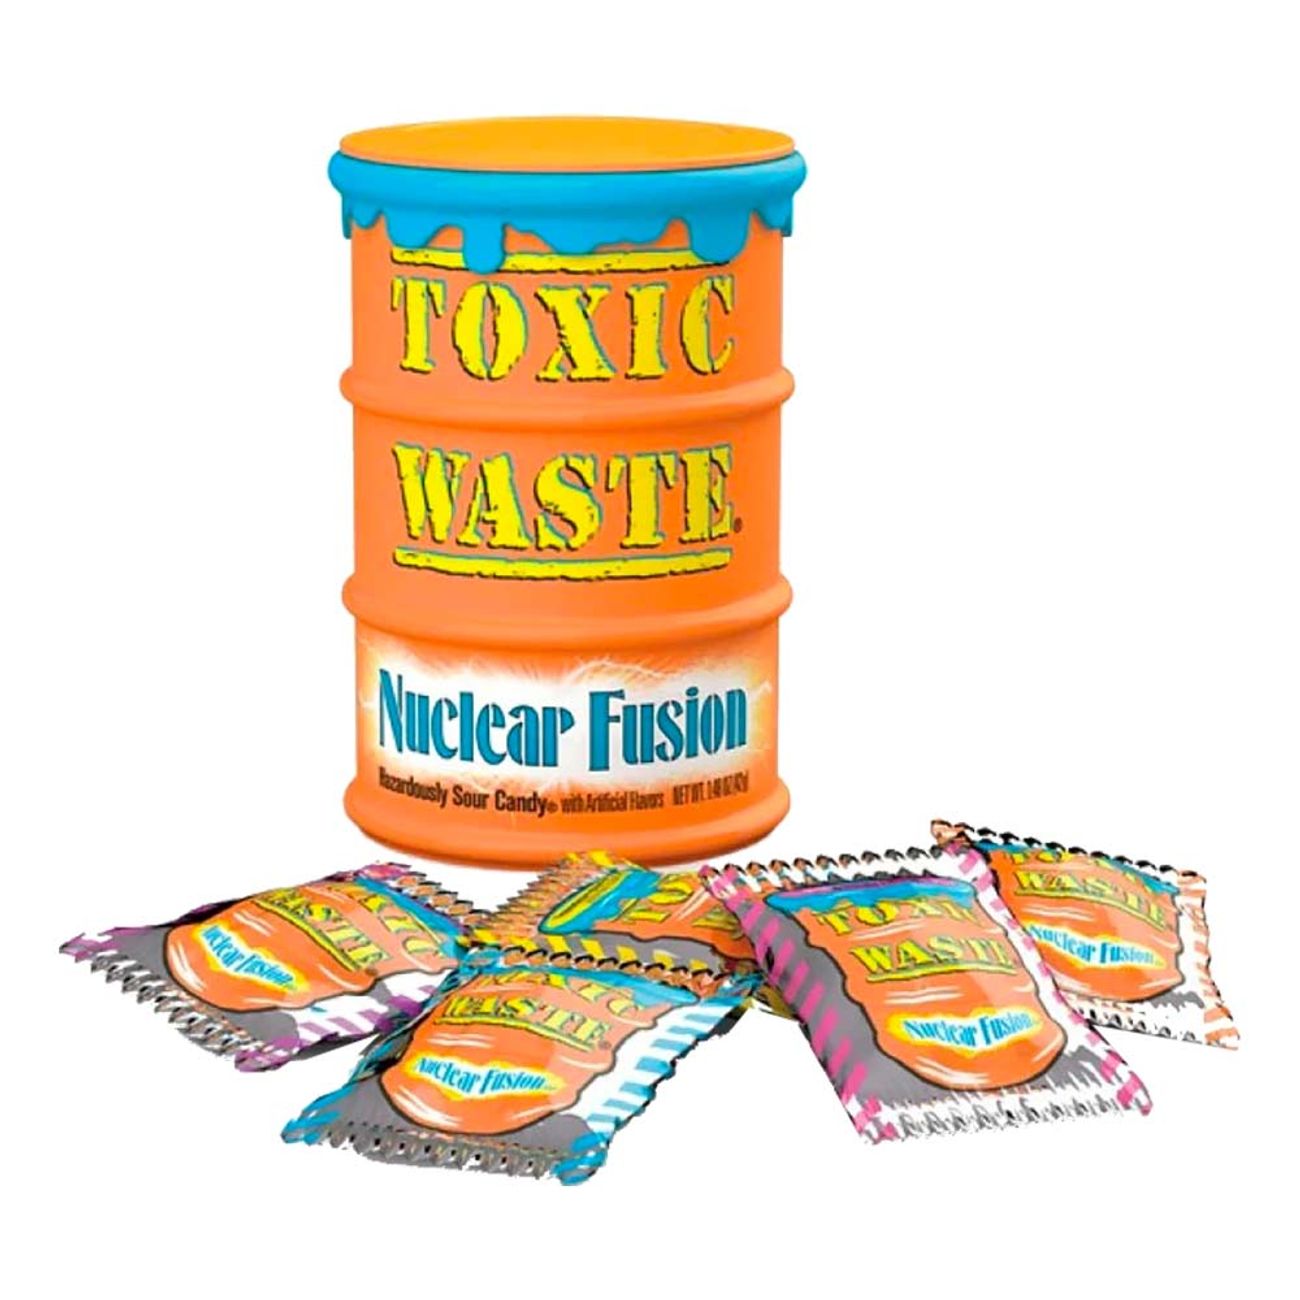 toxic-waste-nuclear-fusion-drum-94836-1